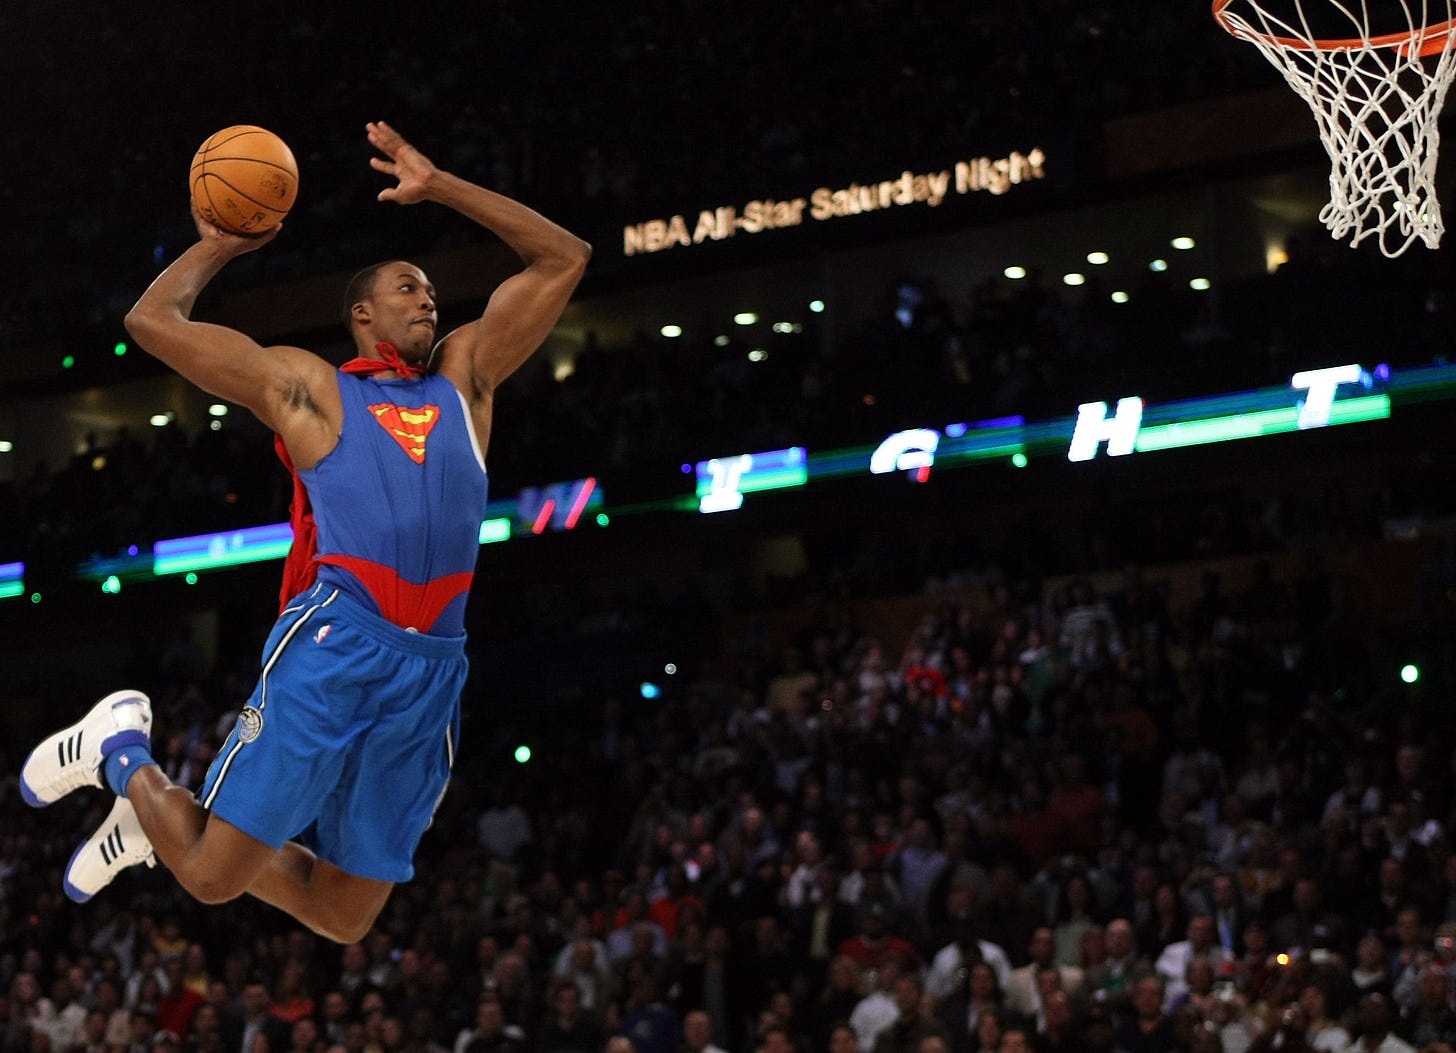 NBA Slam Dunk Contest 2020: Dwight Howard is back, but is Superman?